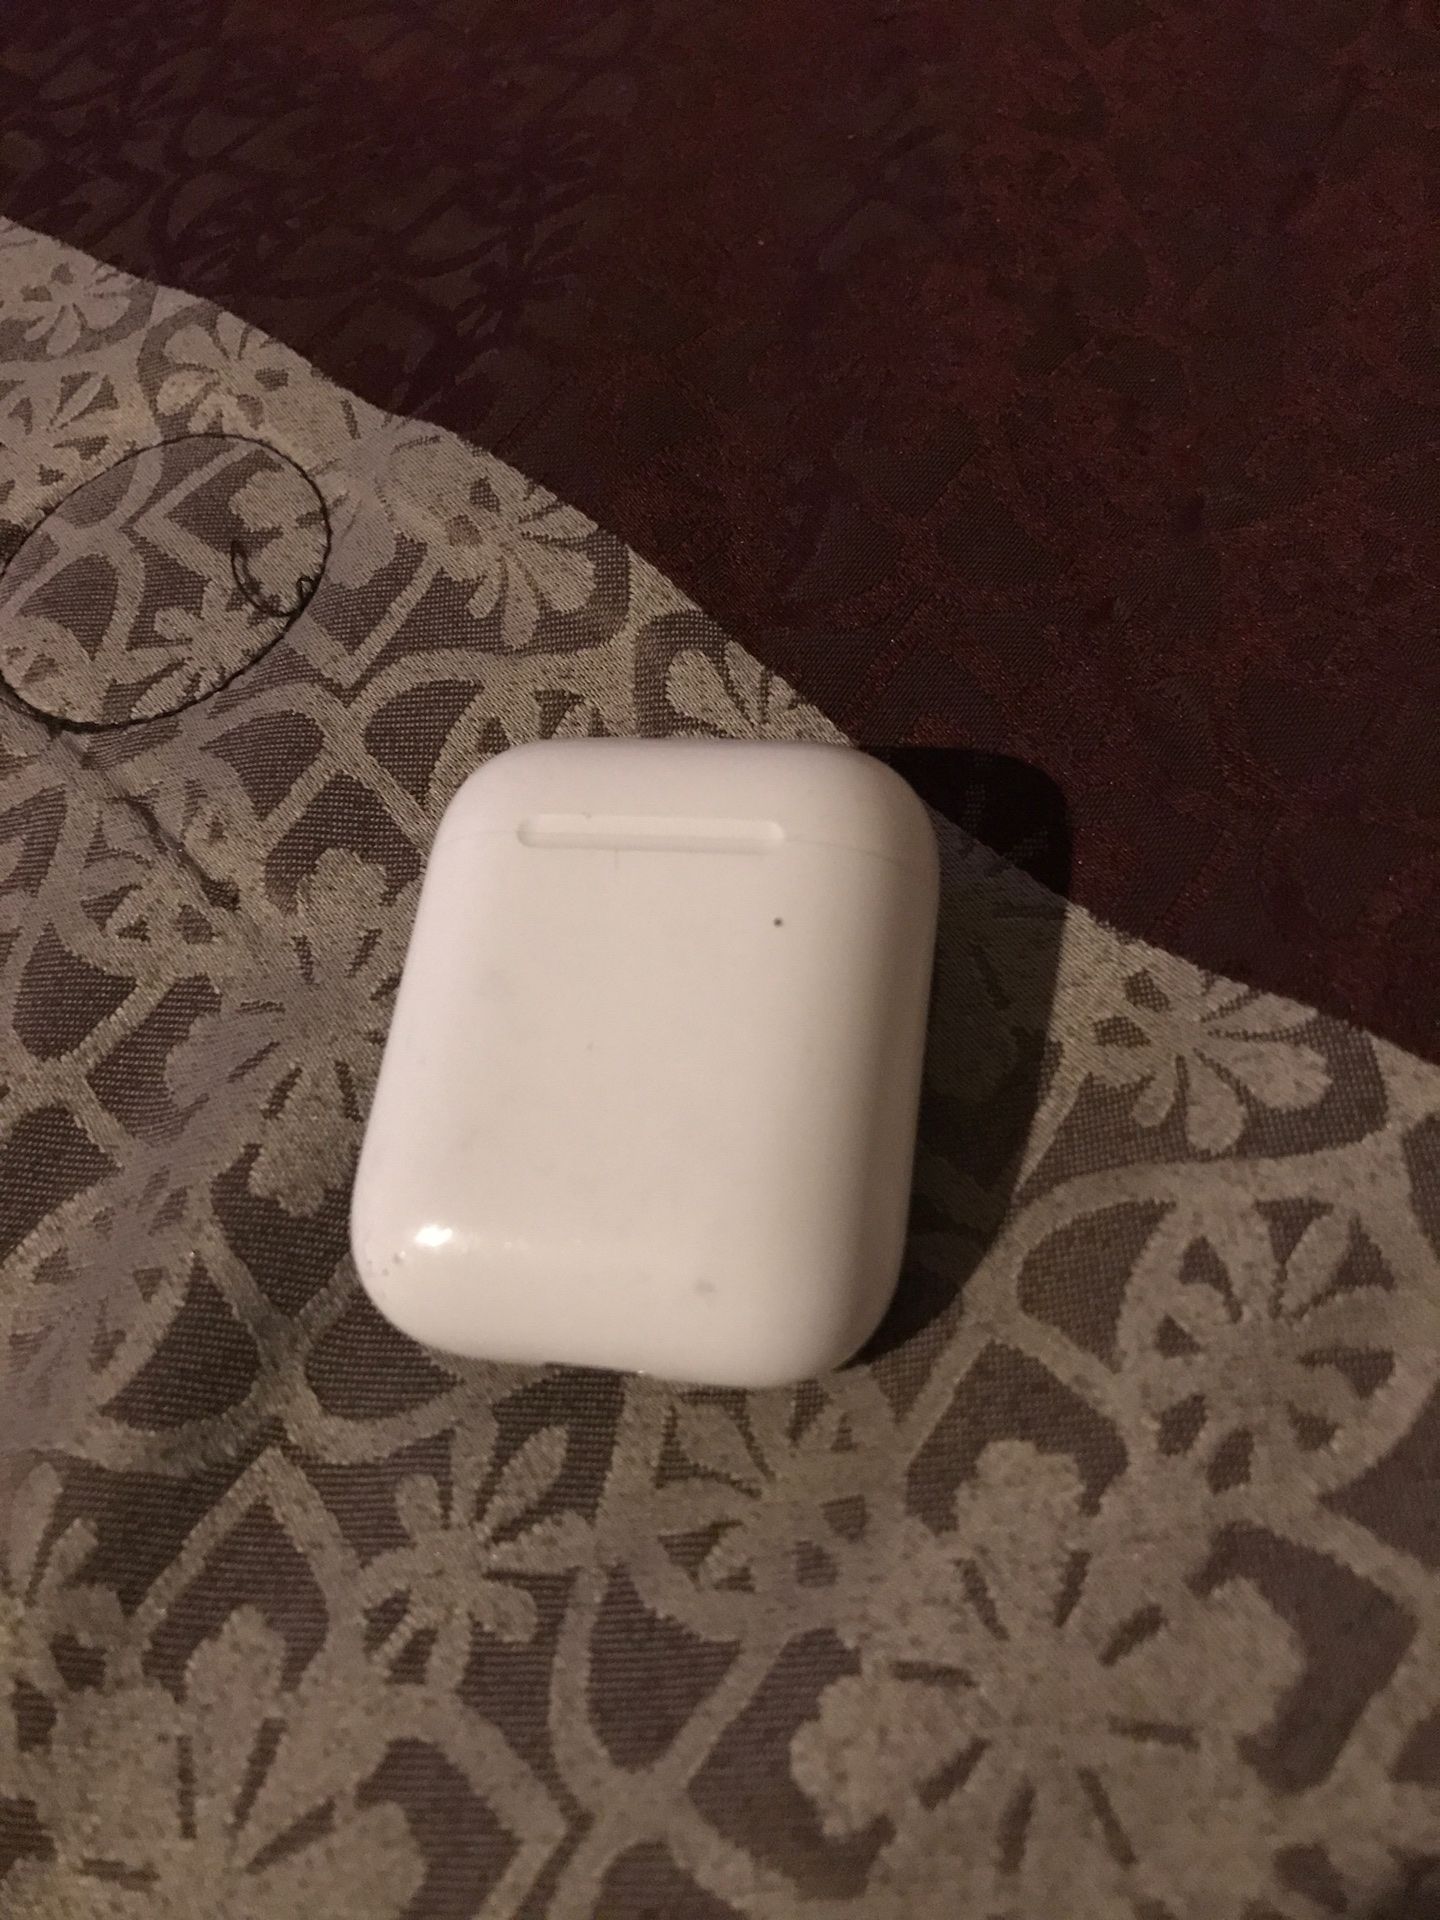 Airpods Gen 1 ( lowest price I’m going is 60)